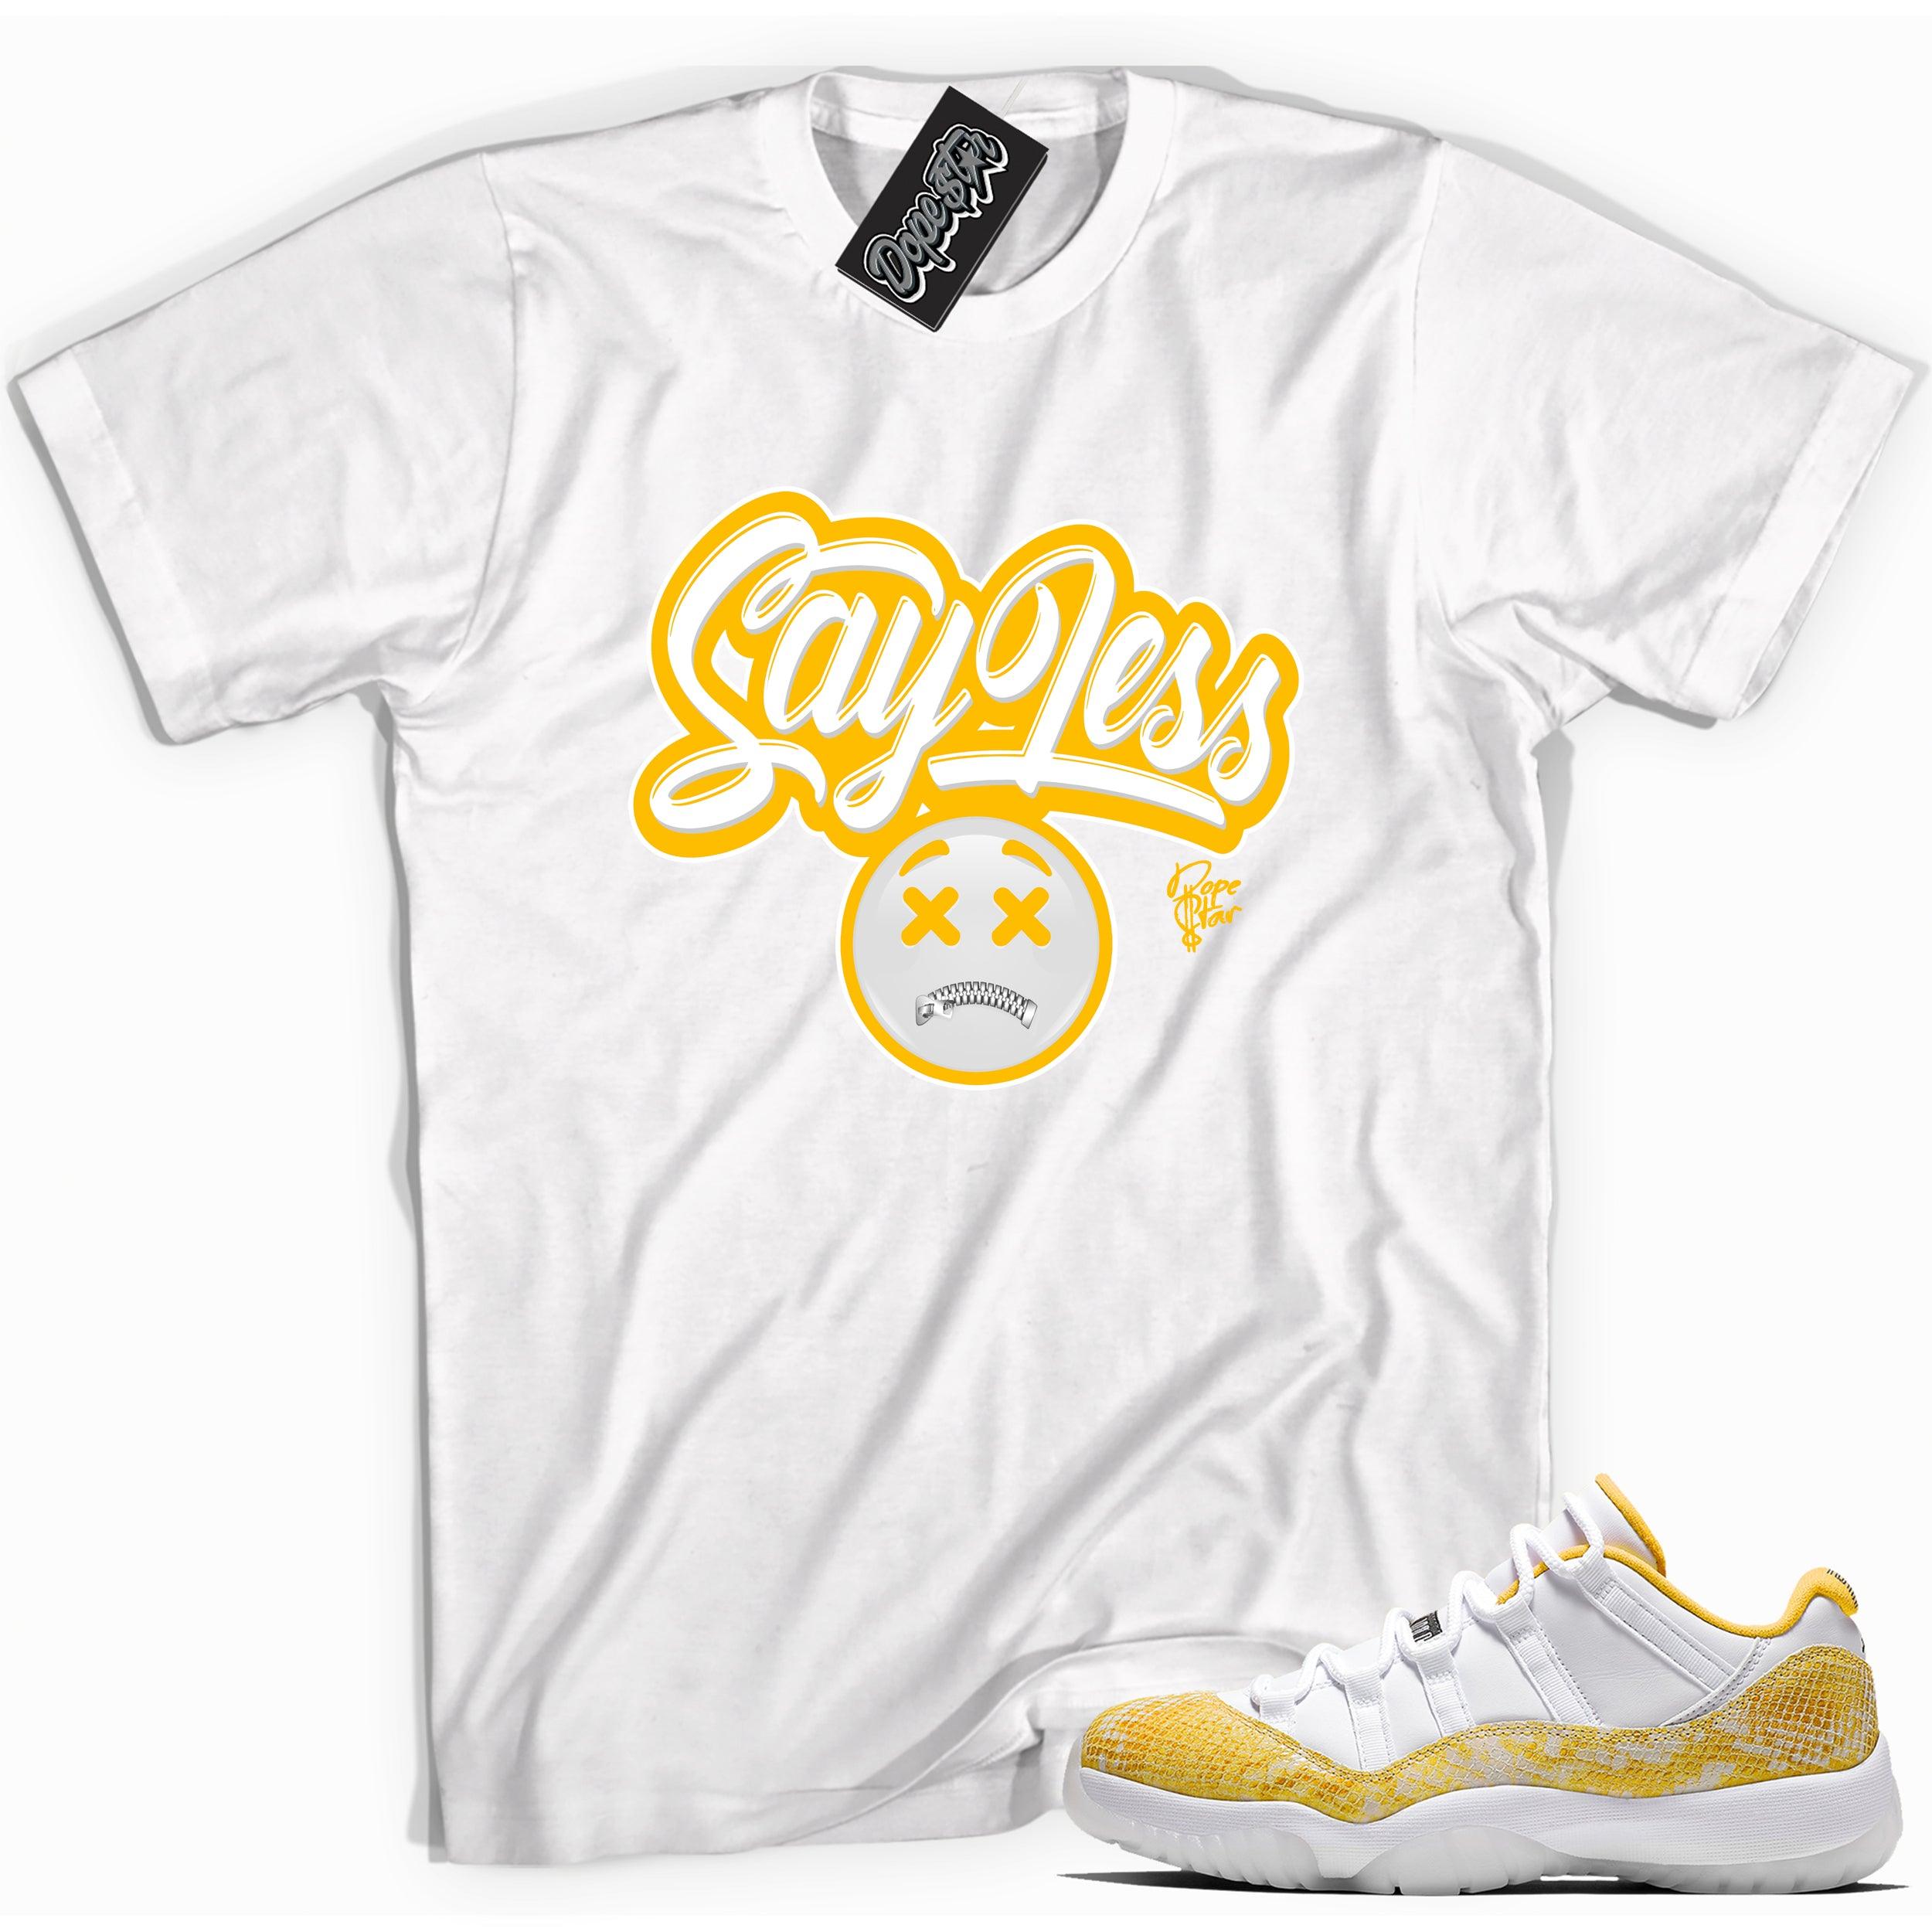 Cool white graphic tee with 'say less' print, that perfectly matches Air Jordan 11 Retro Low Yellow Snakeskin sneakers